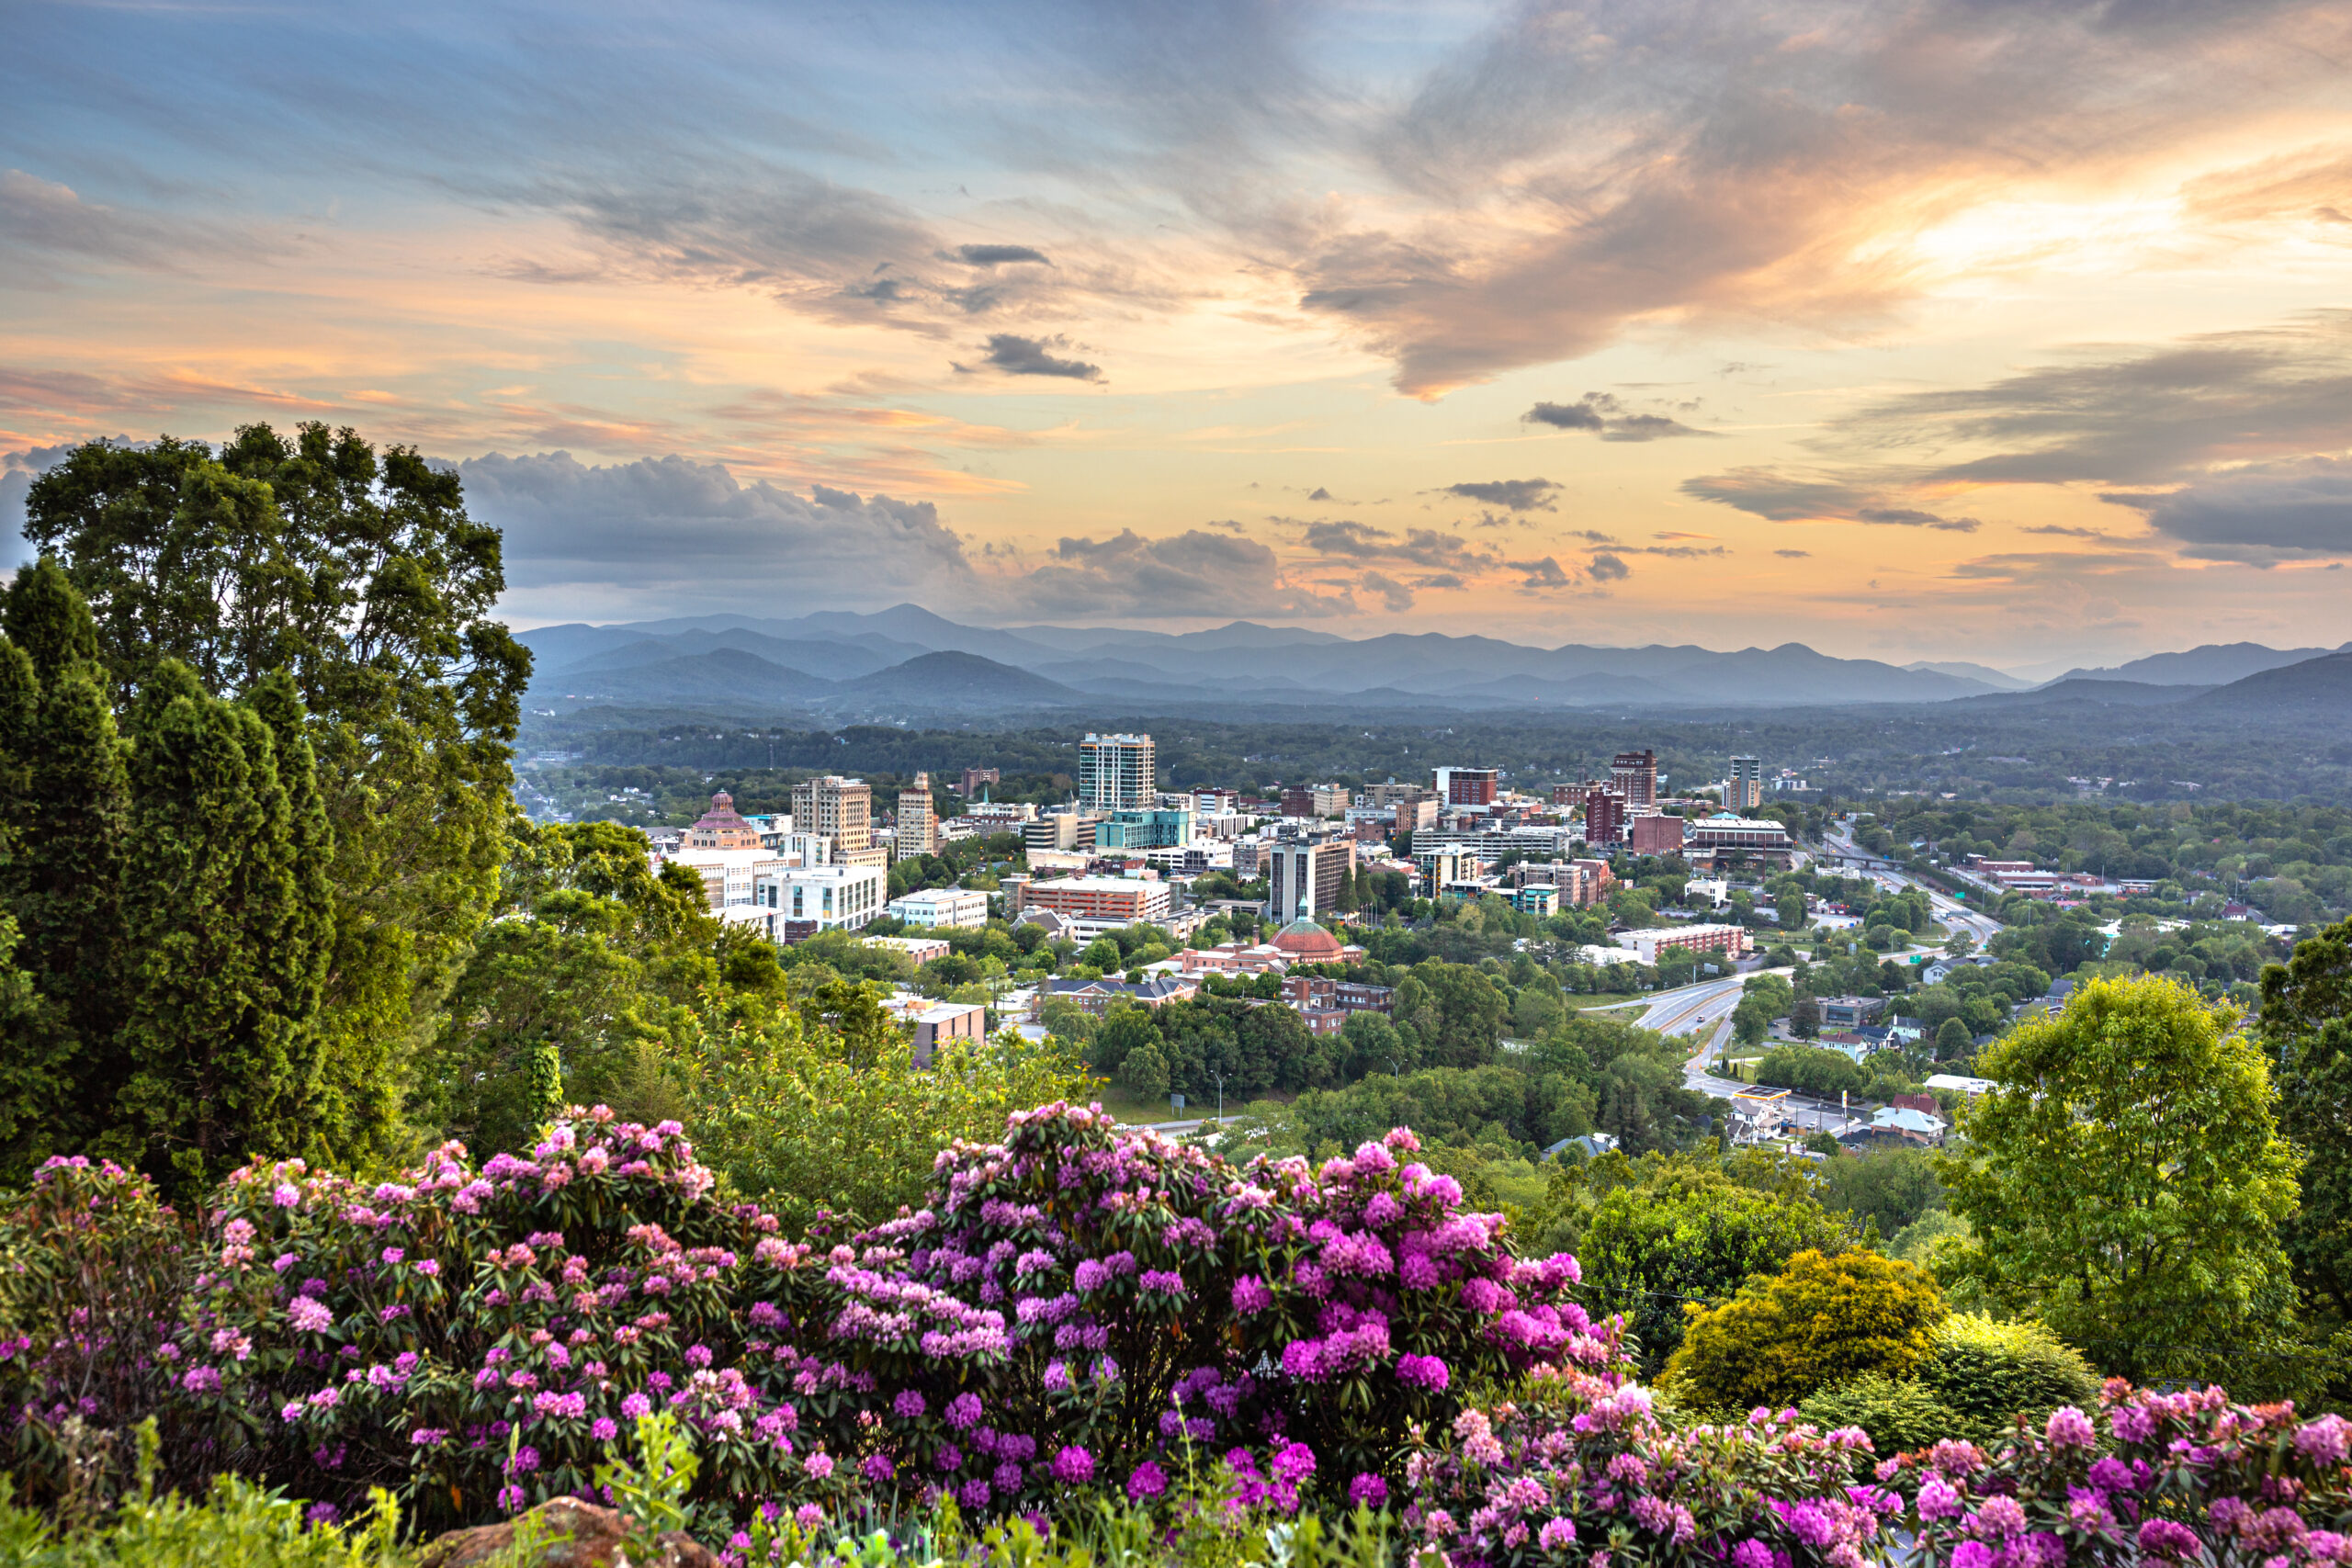 The city of Asheville from a distance, with flowers and trees in the foreground.